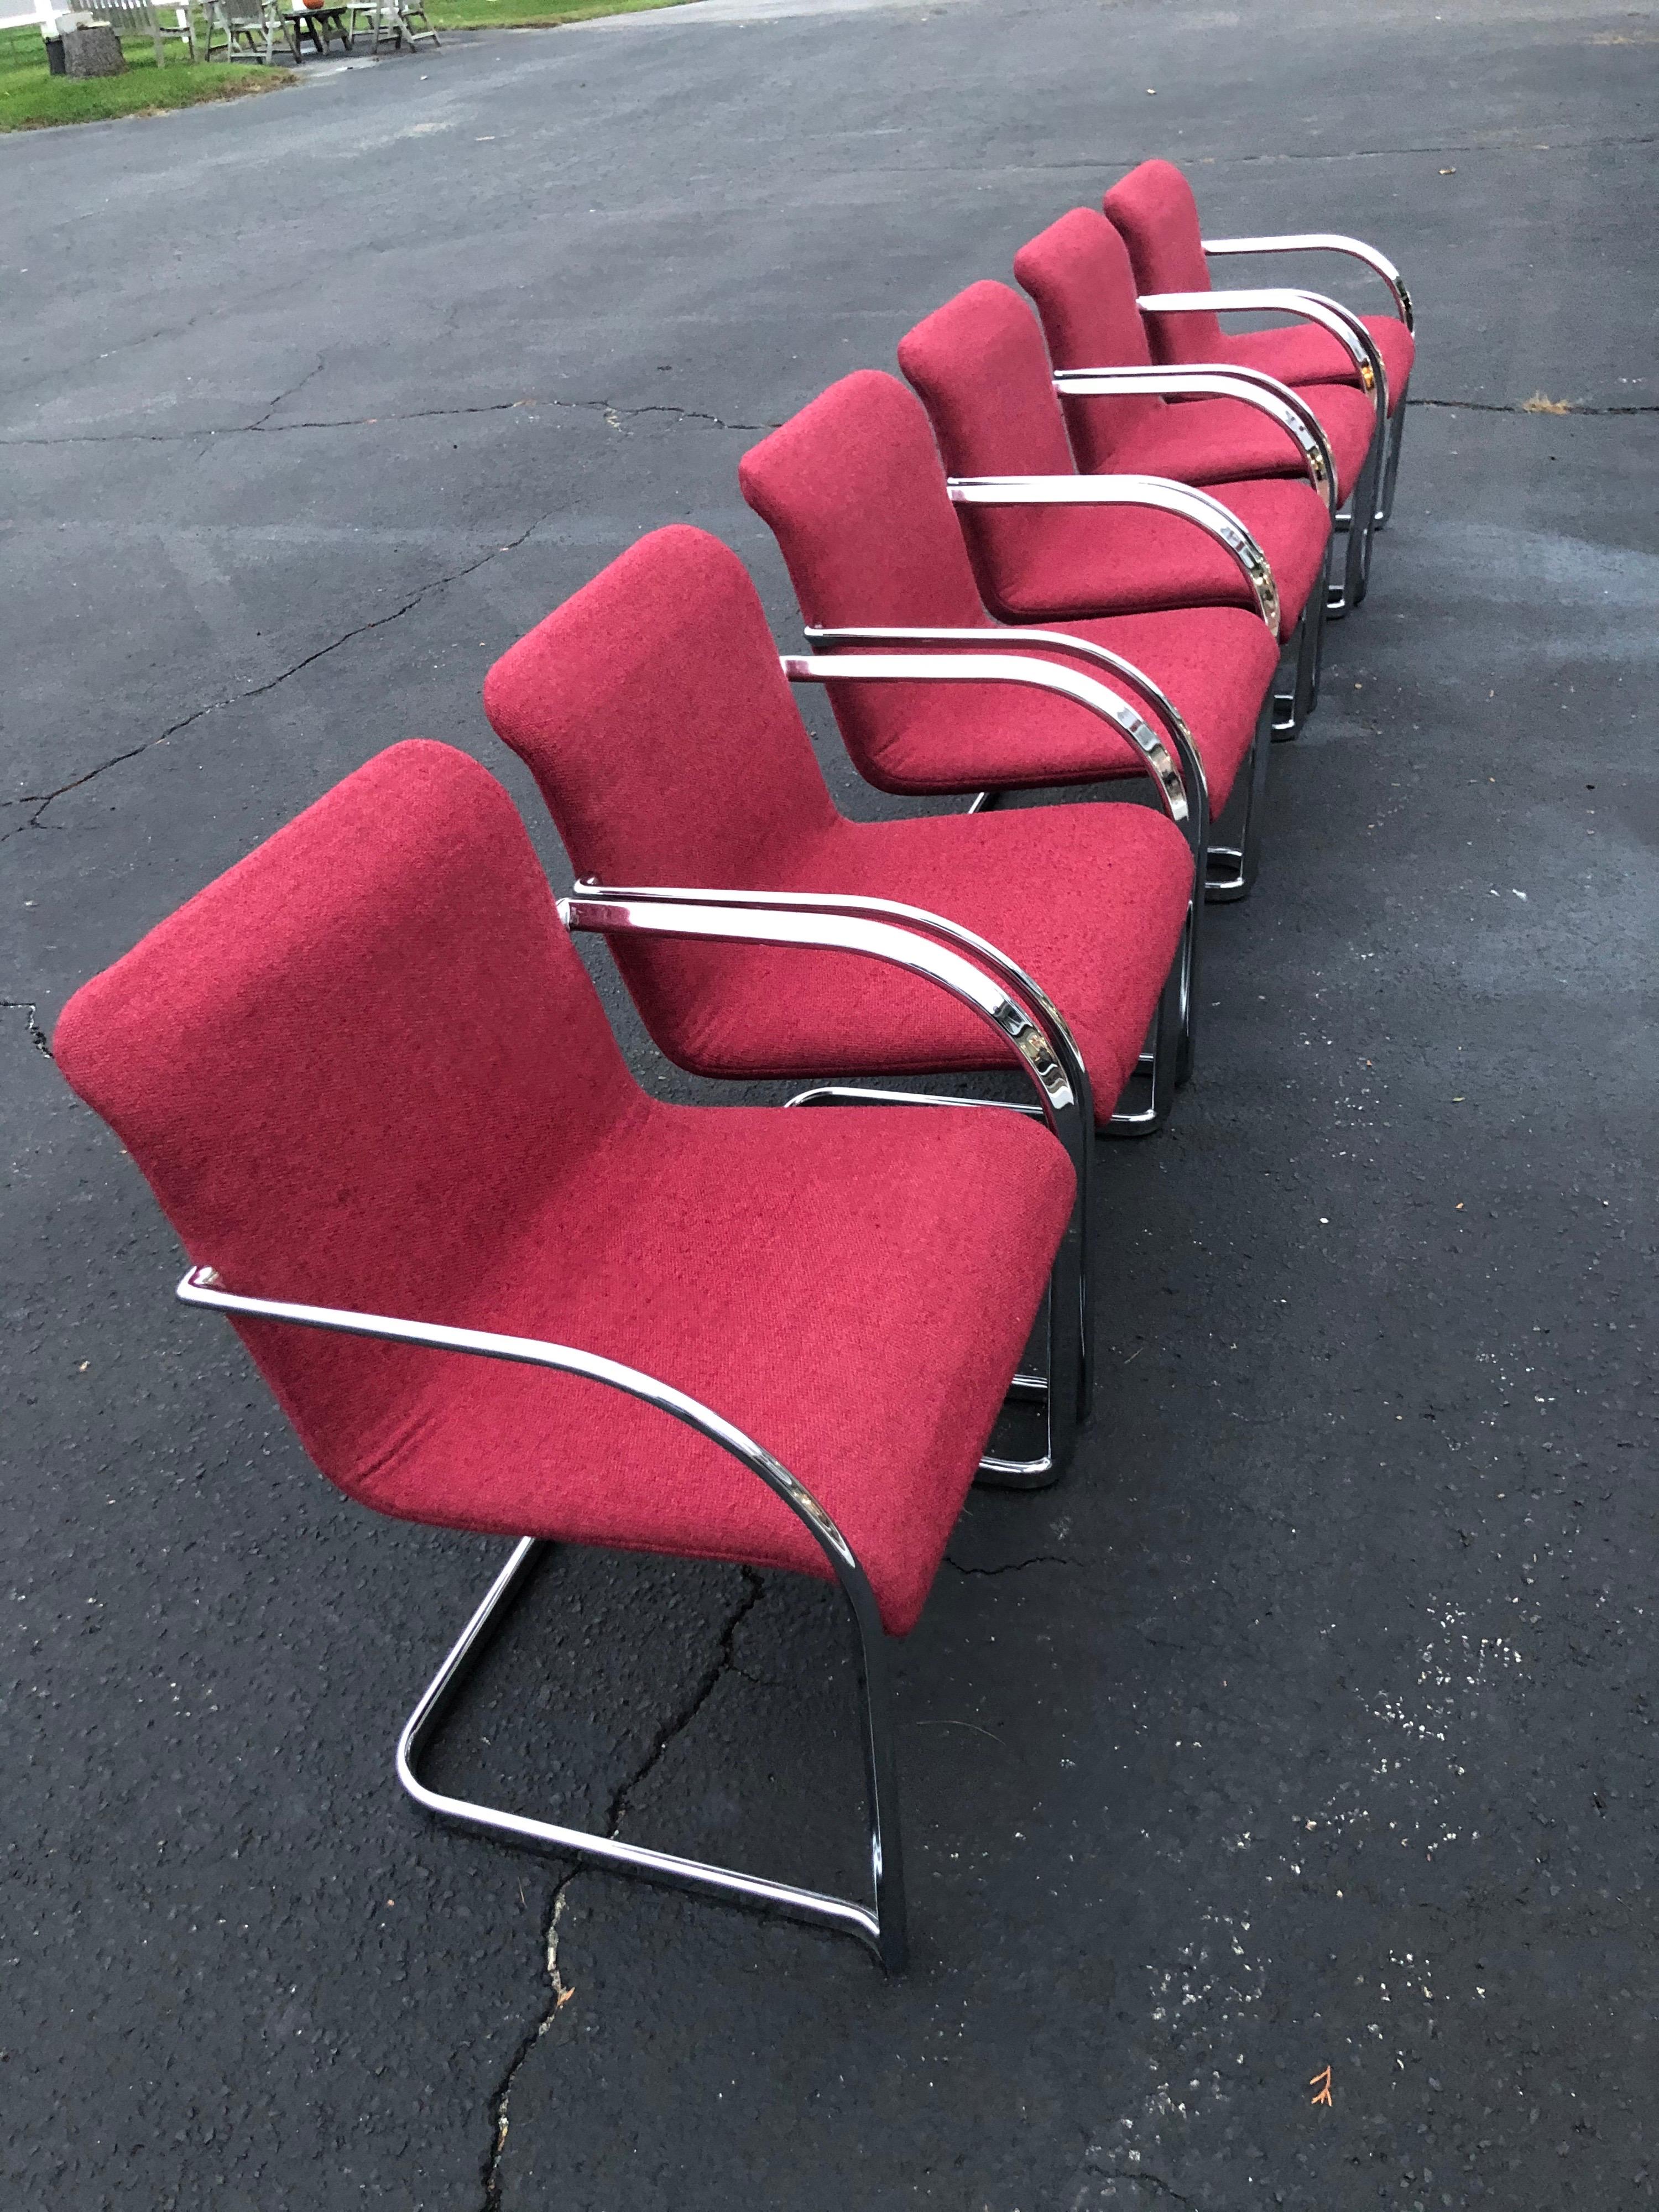 Upholstery Set of Six Raspberry and Chrome Dining or Office Chairs